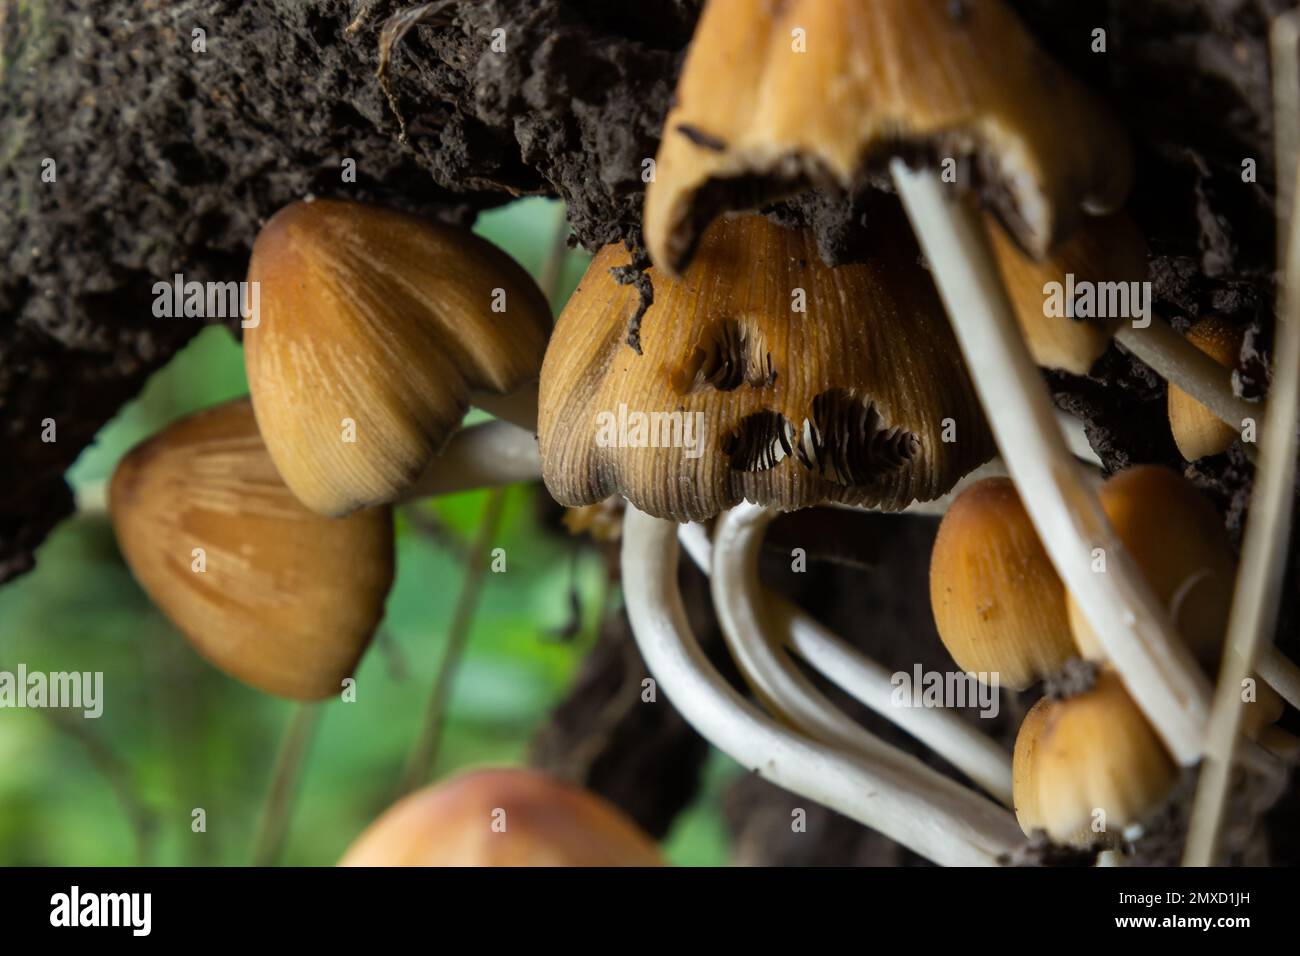 Coprinellus micaceus. Group of mushrooms on woods in nature. Stock Photo